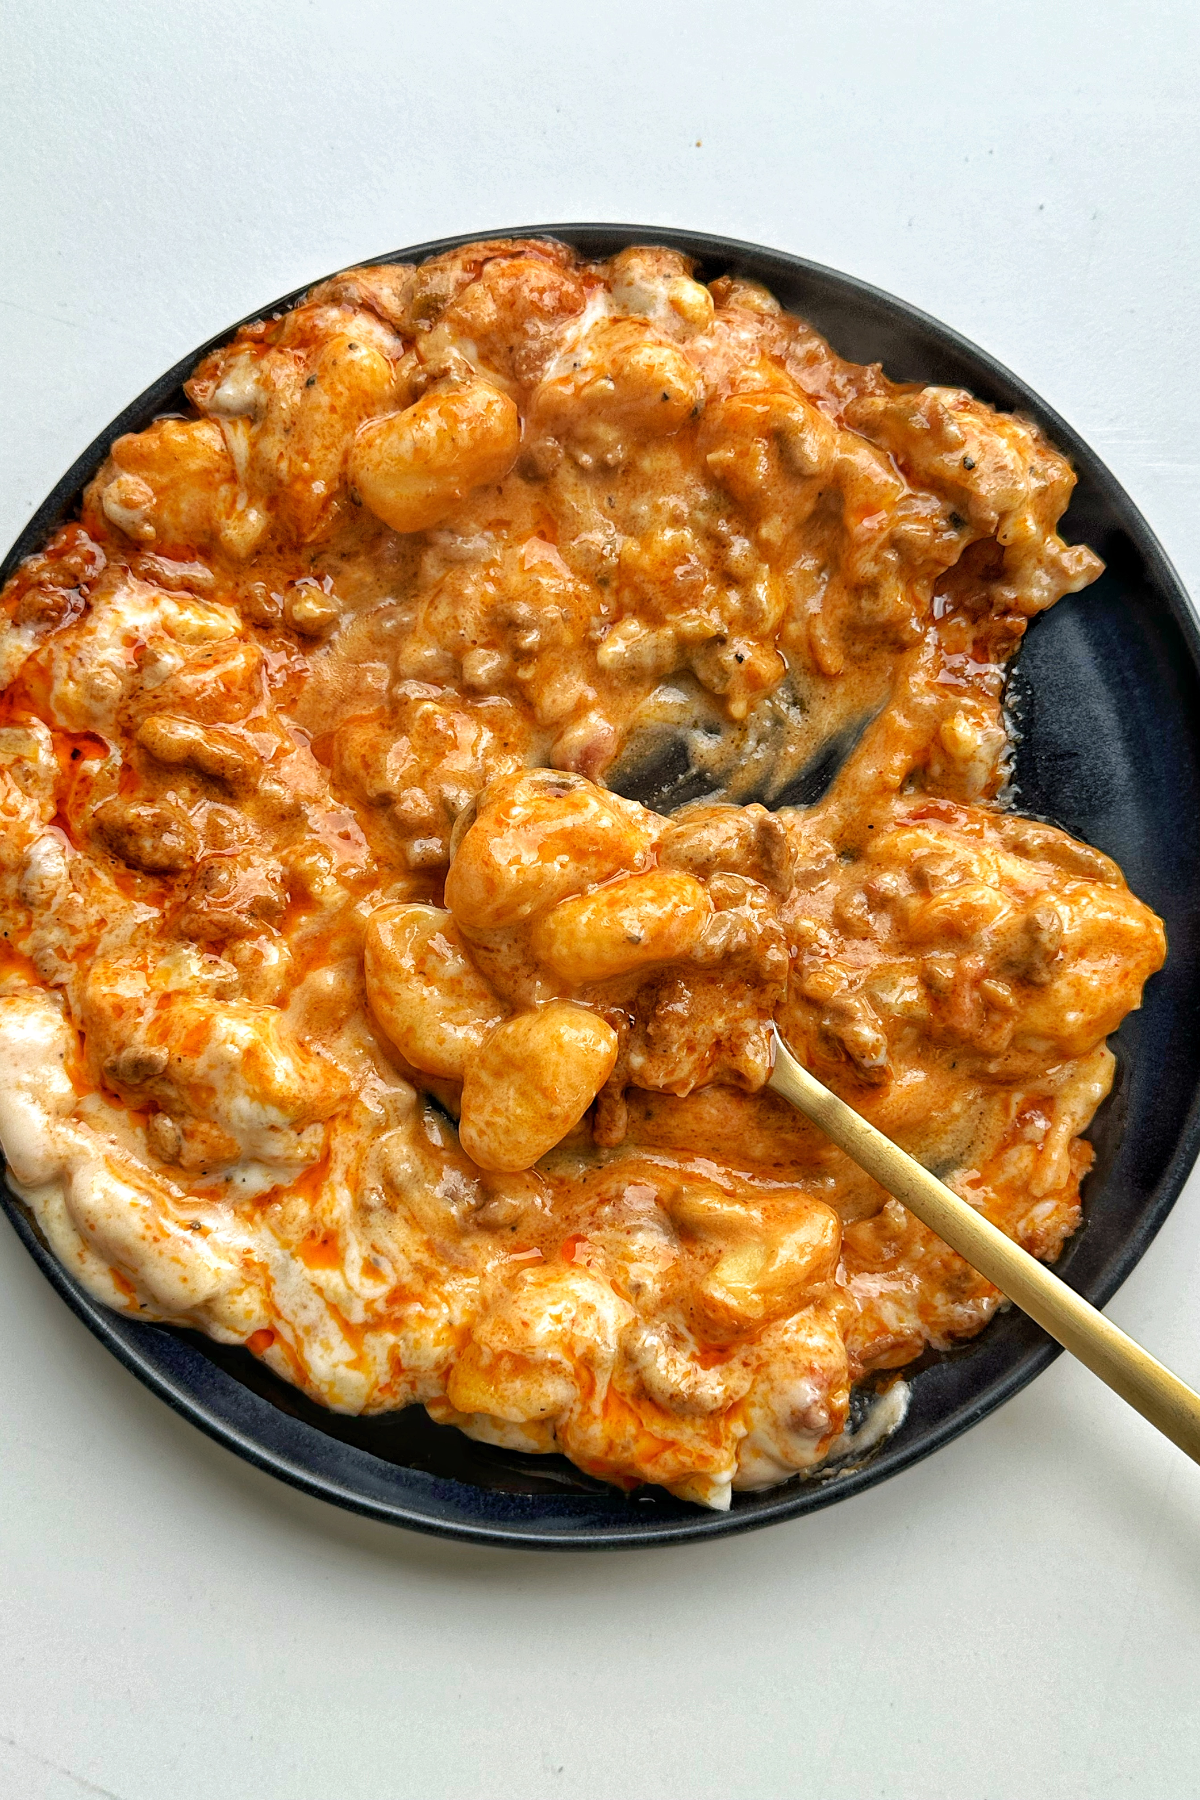 Plate of gochujang gnocchi lasagne on white background with golden spoon.